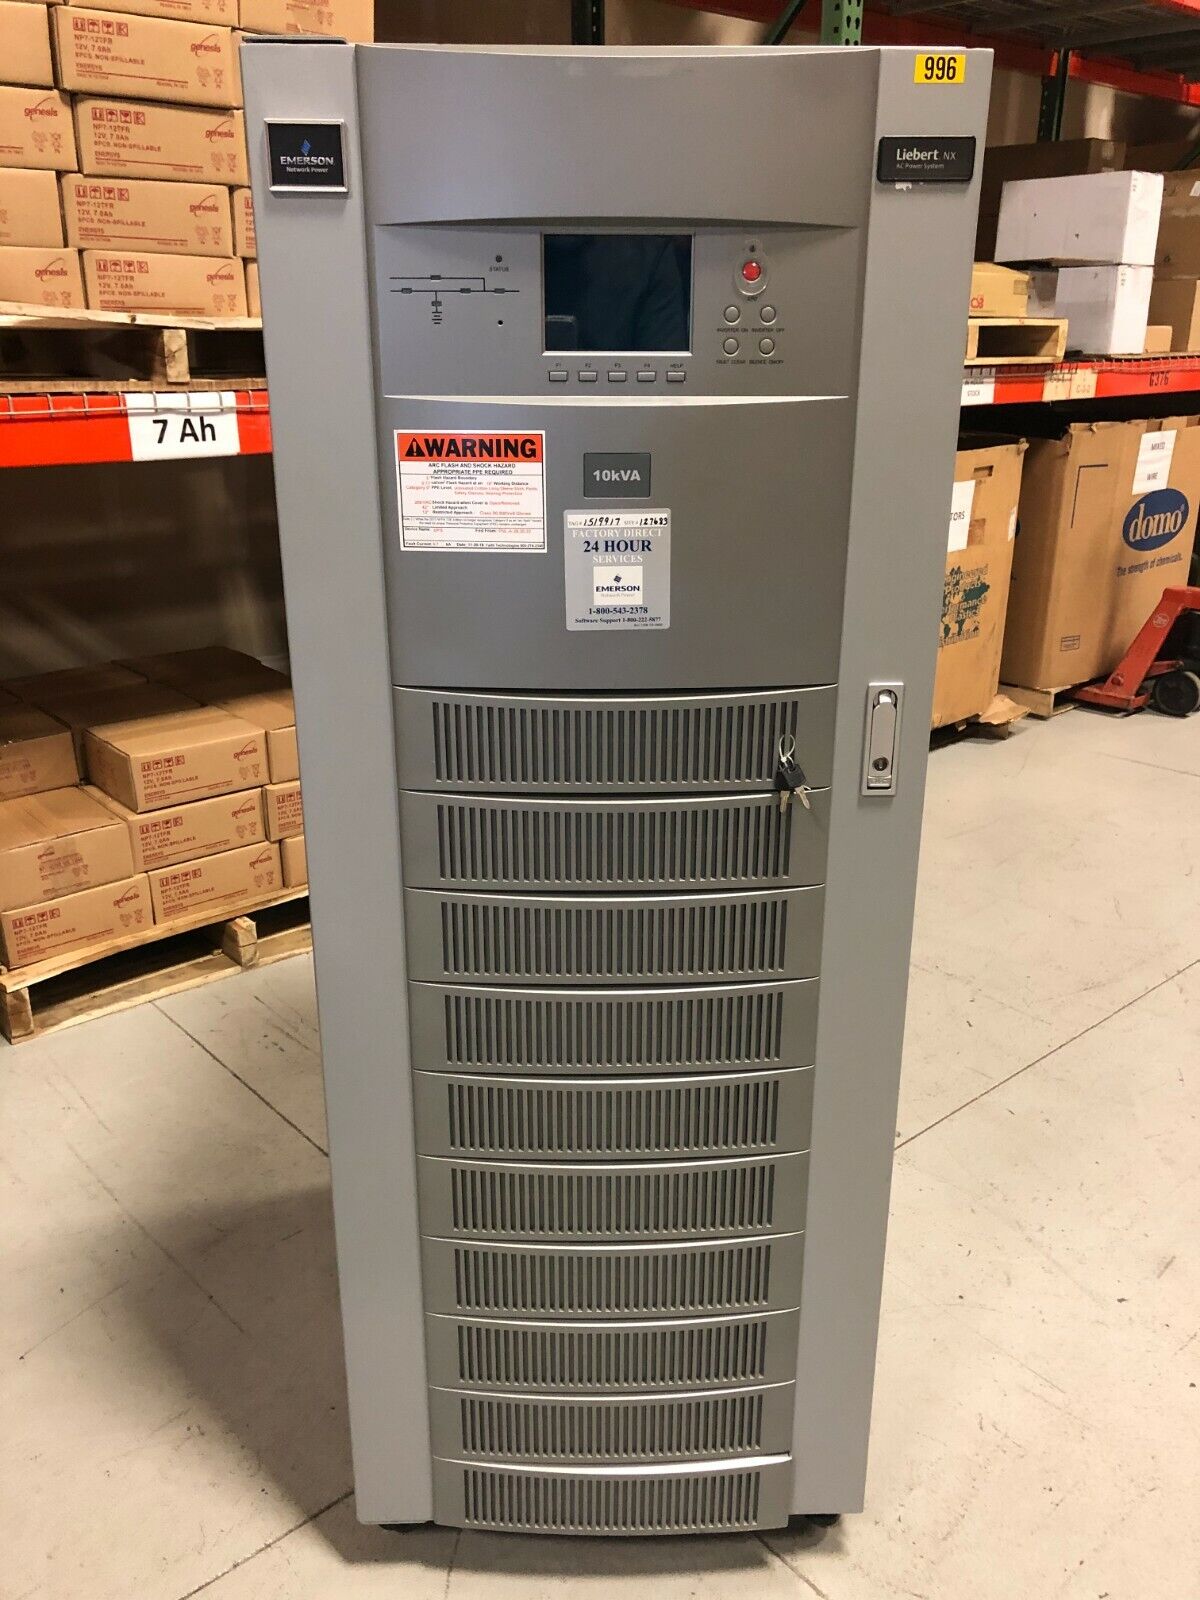 Liebert NX 10kVA / 8kW 208V 3-Phase UPS System / Tested (Includes NEW Batteries)